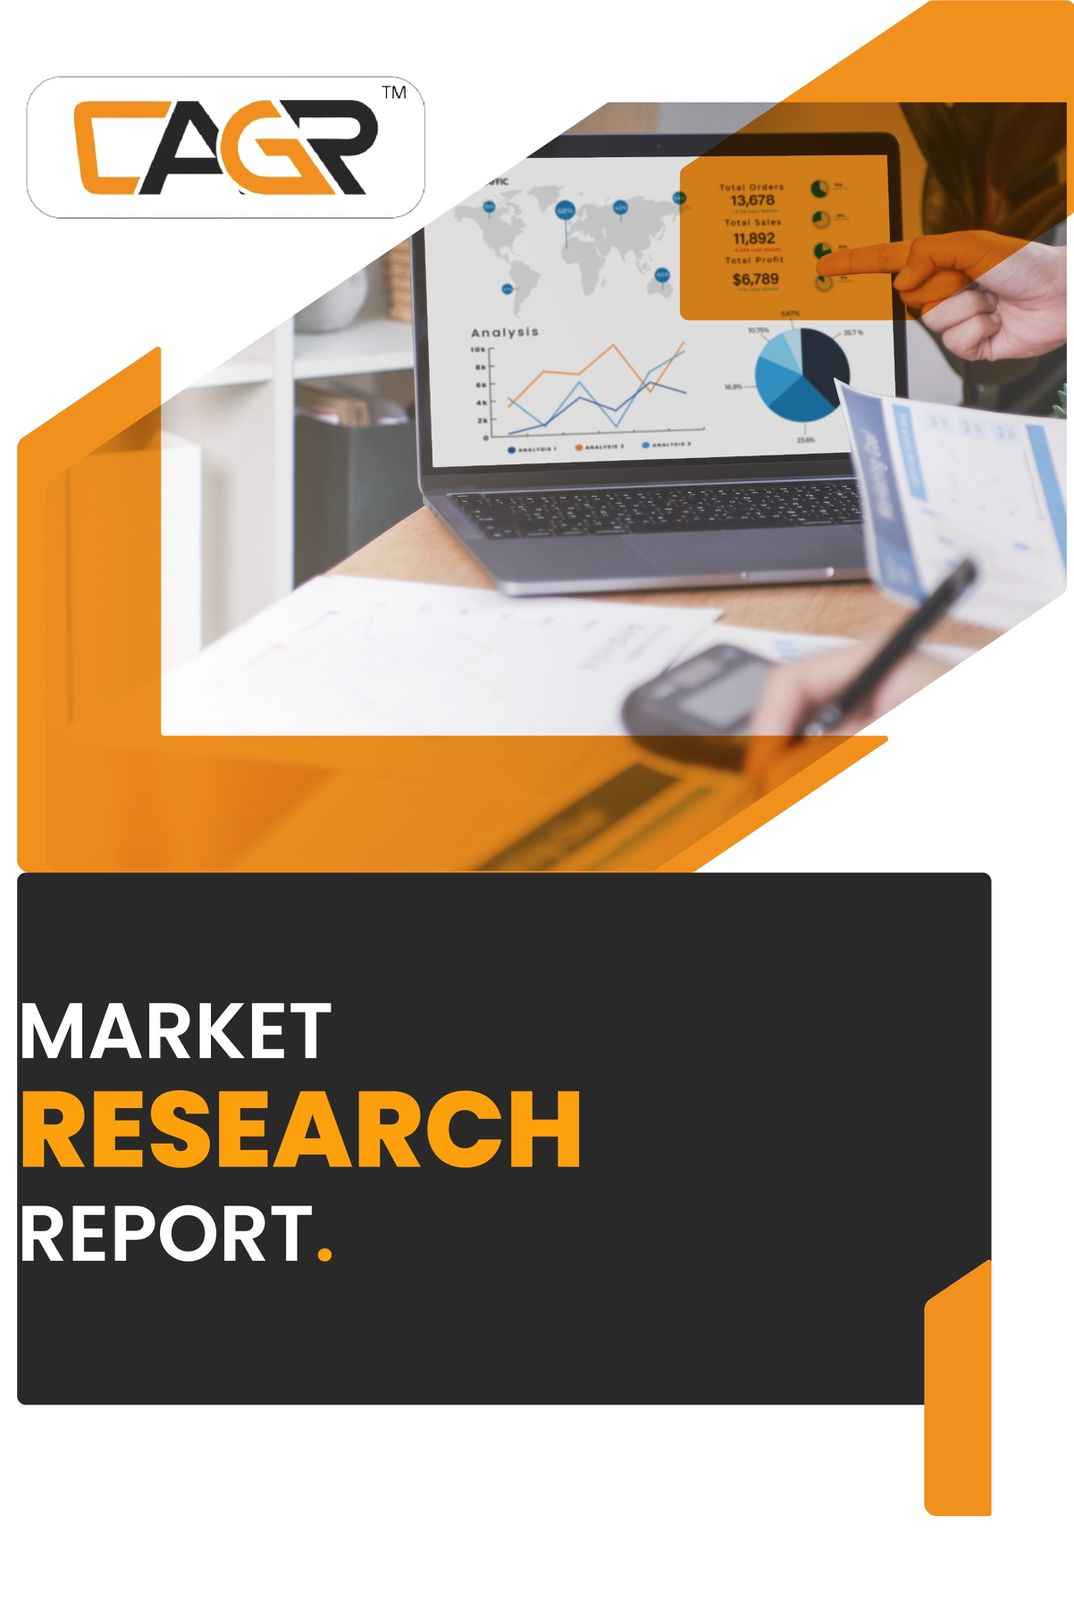 Global Voice Prosthesis Devices Market Status, Trends and COVID-19 Impact Report 2022